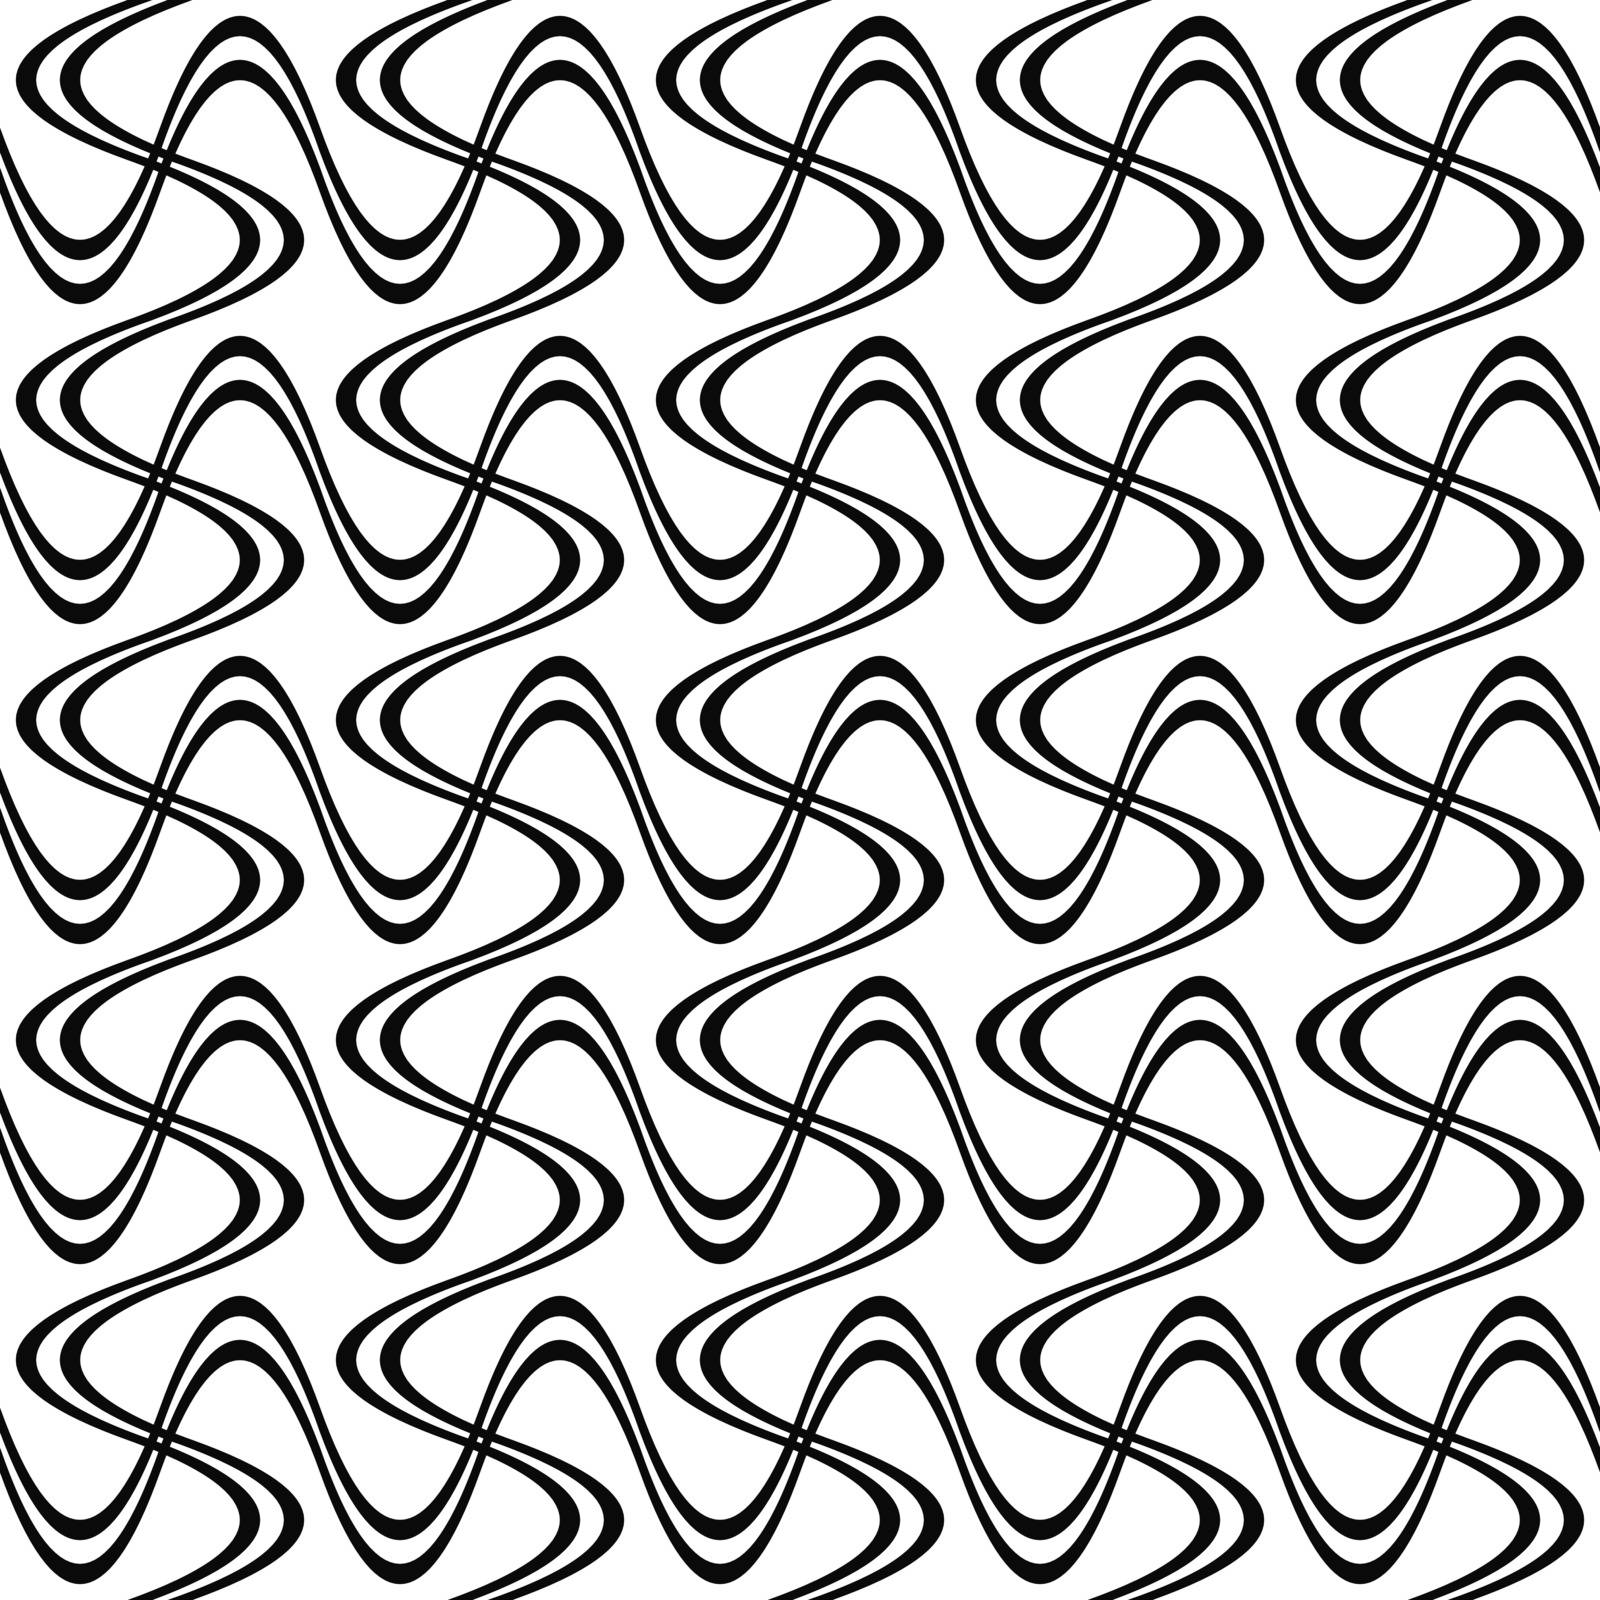 Repeating monochrome twisted stripe design pattern background